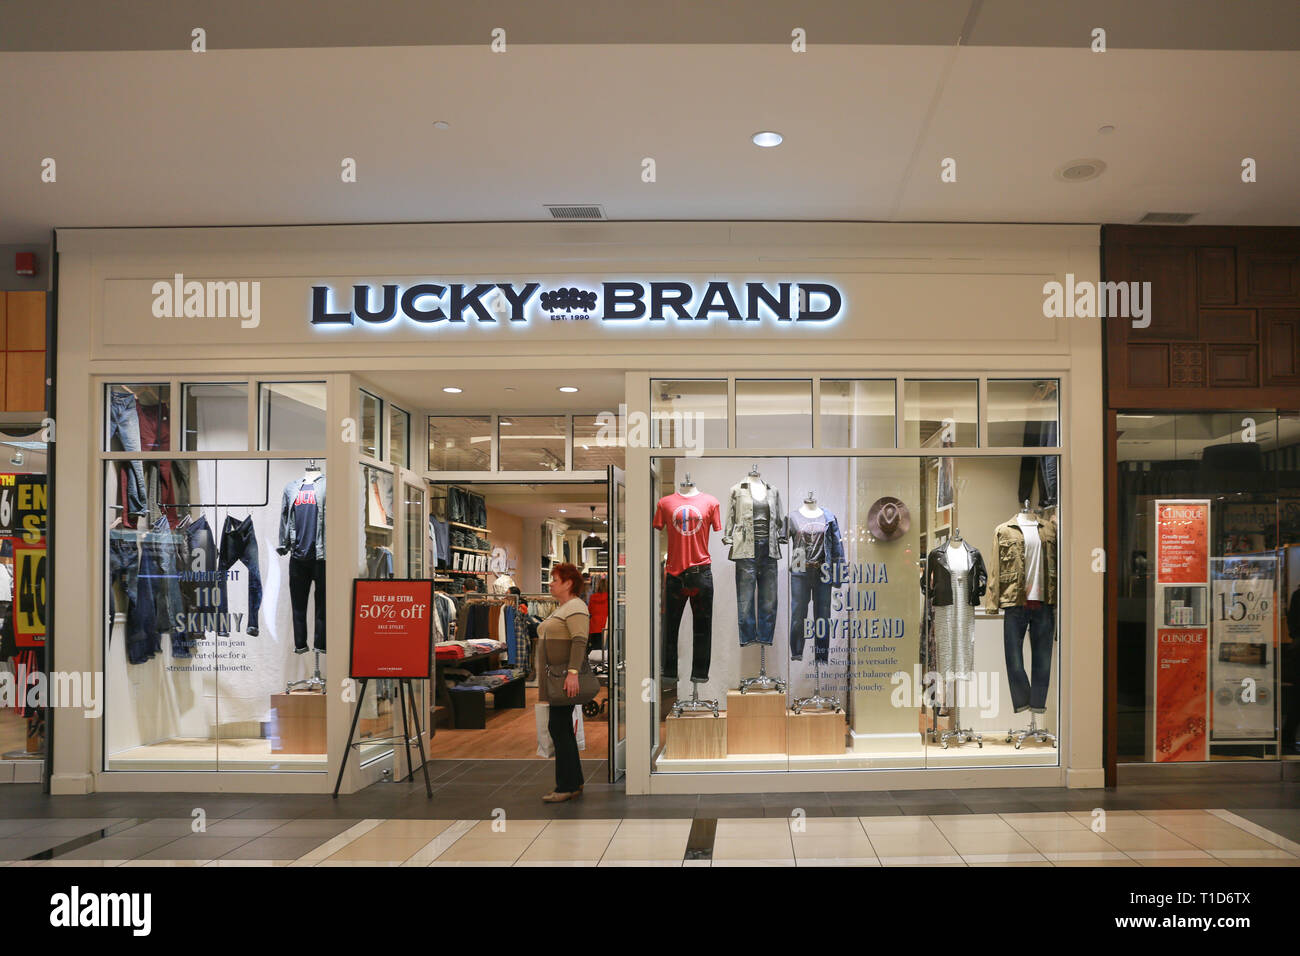 Lucky Brand High Resolution Stock Photography and Images - Alamy